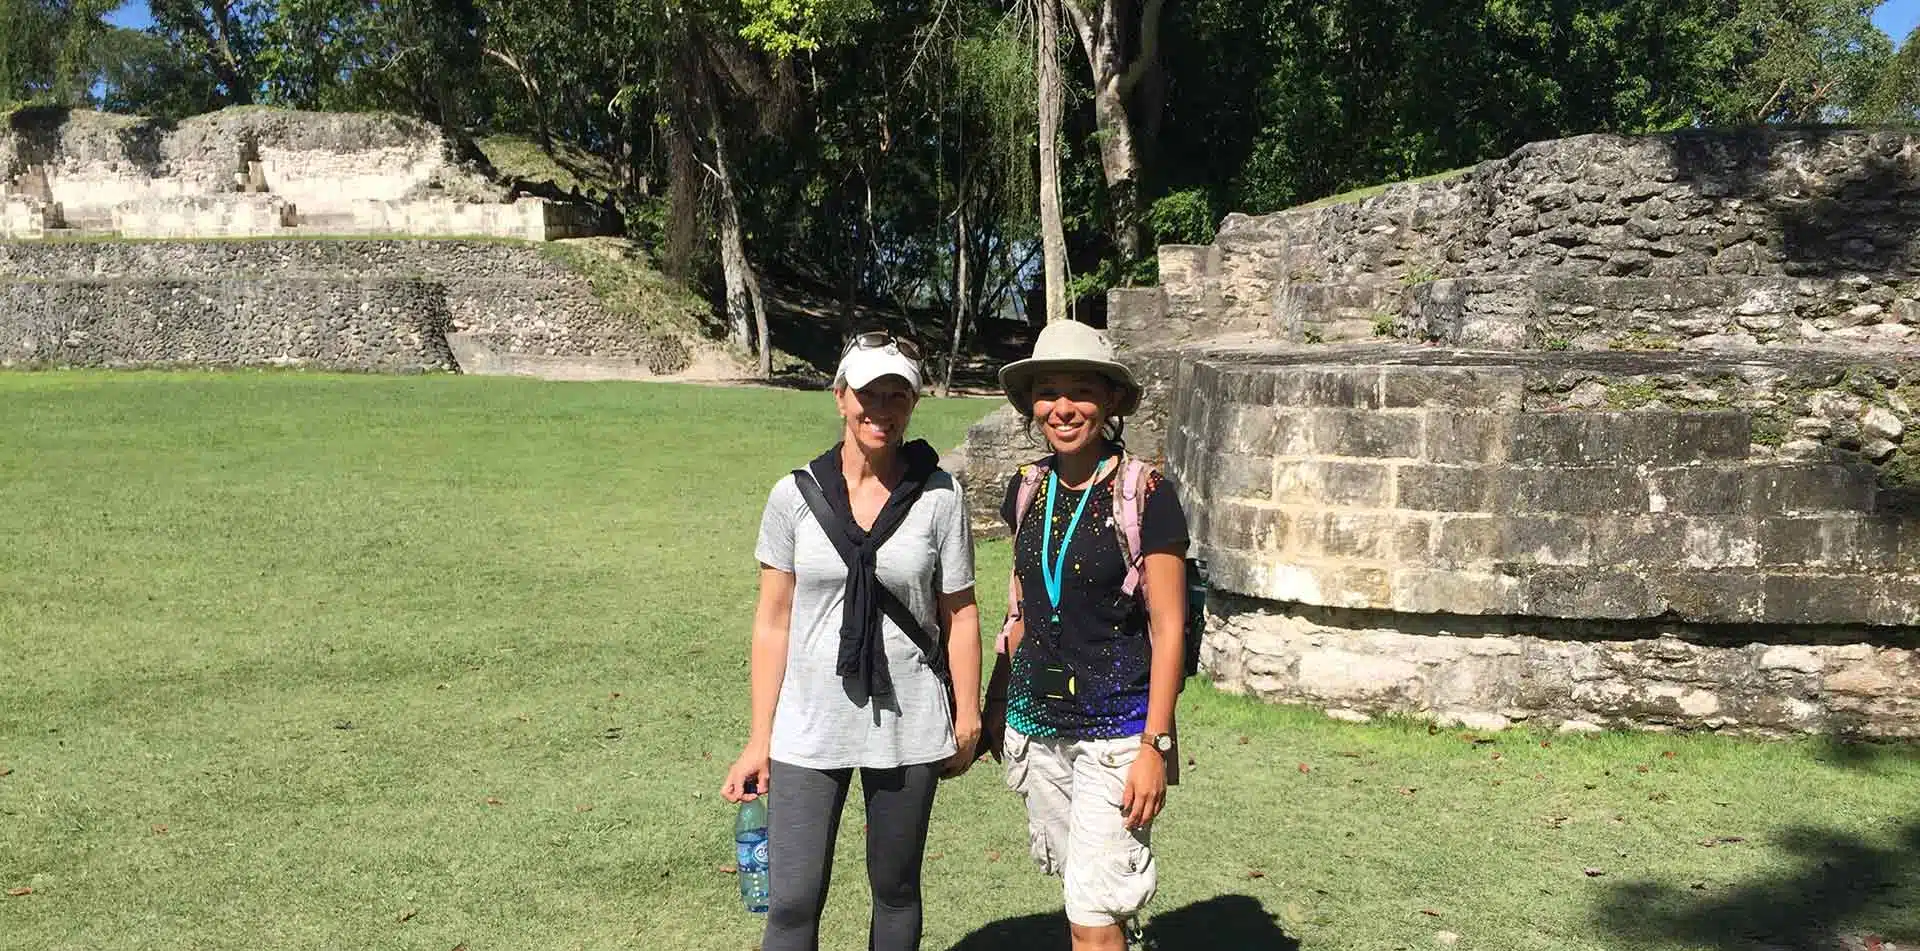 Central America Belize women smiling ancient Mayan ruins historical architecture - luxury vacation destinations